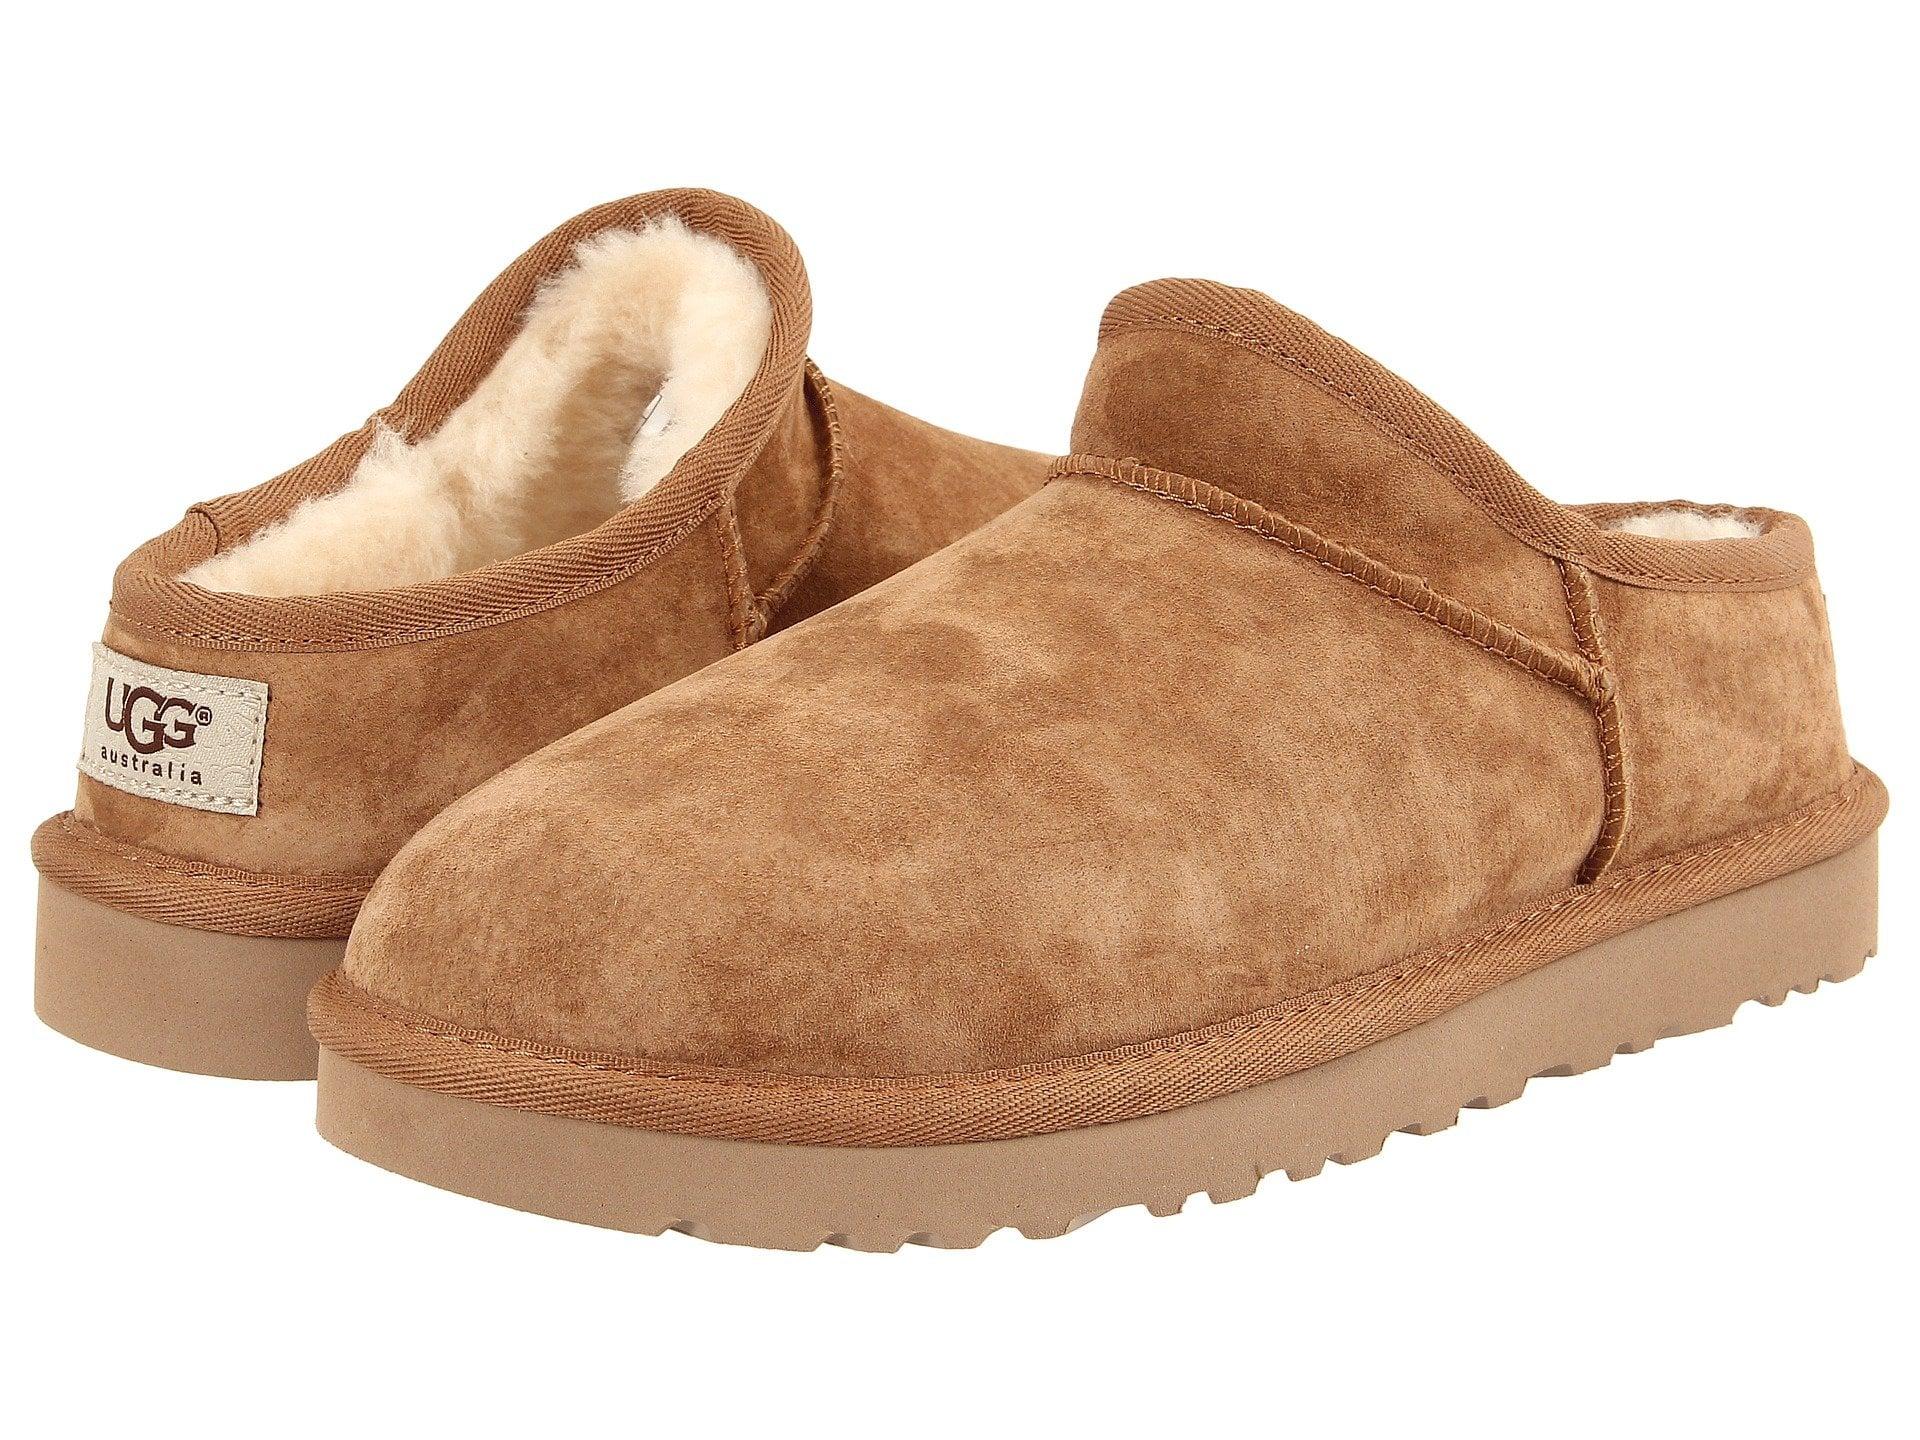 UGG Classic Slippers. Get Cozy This Season With These 11